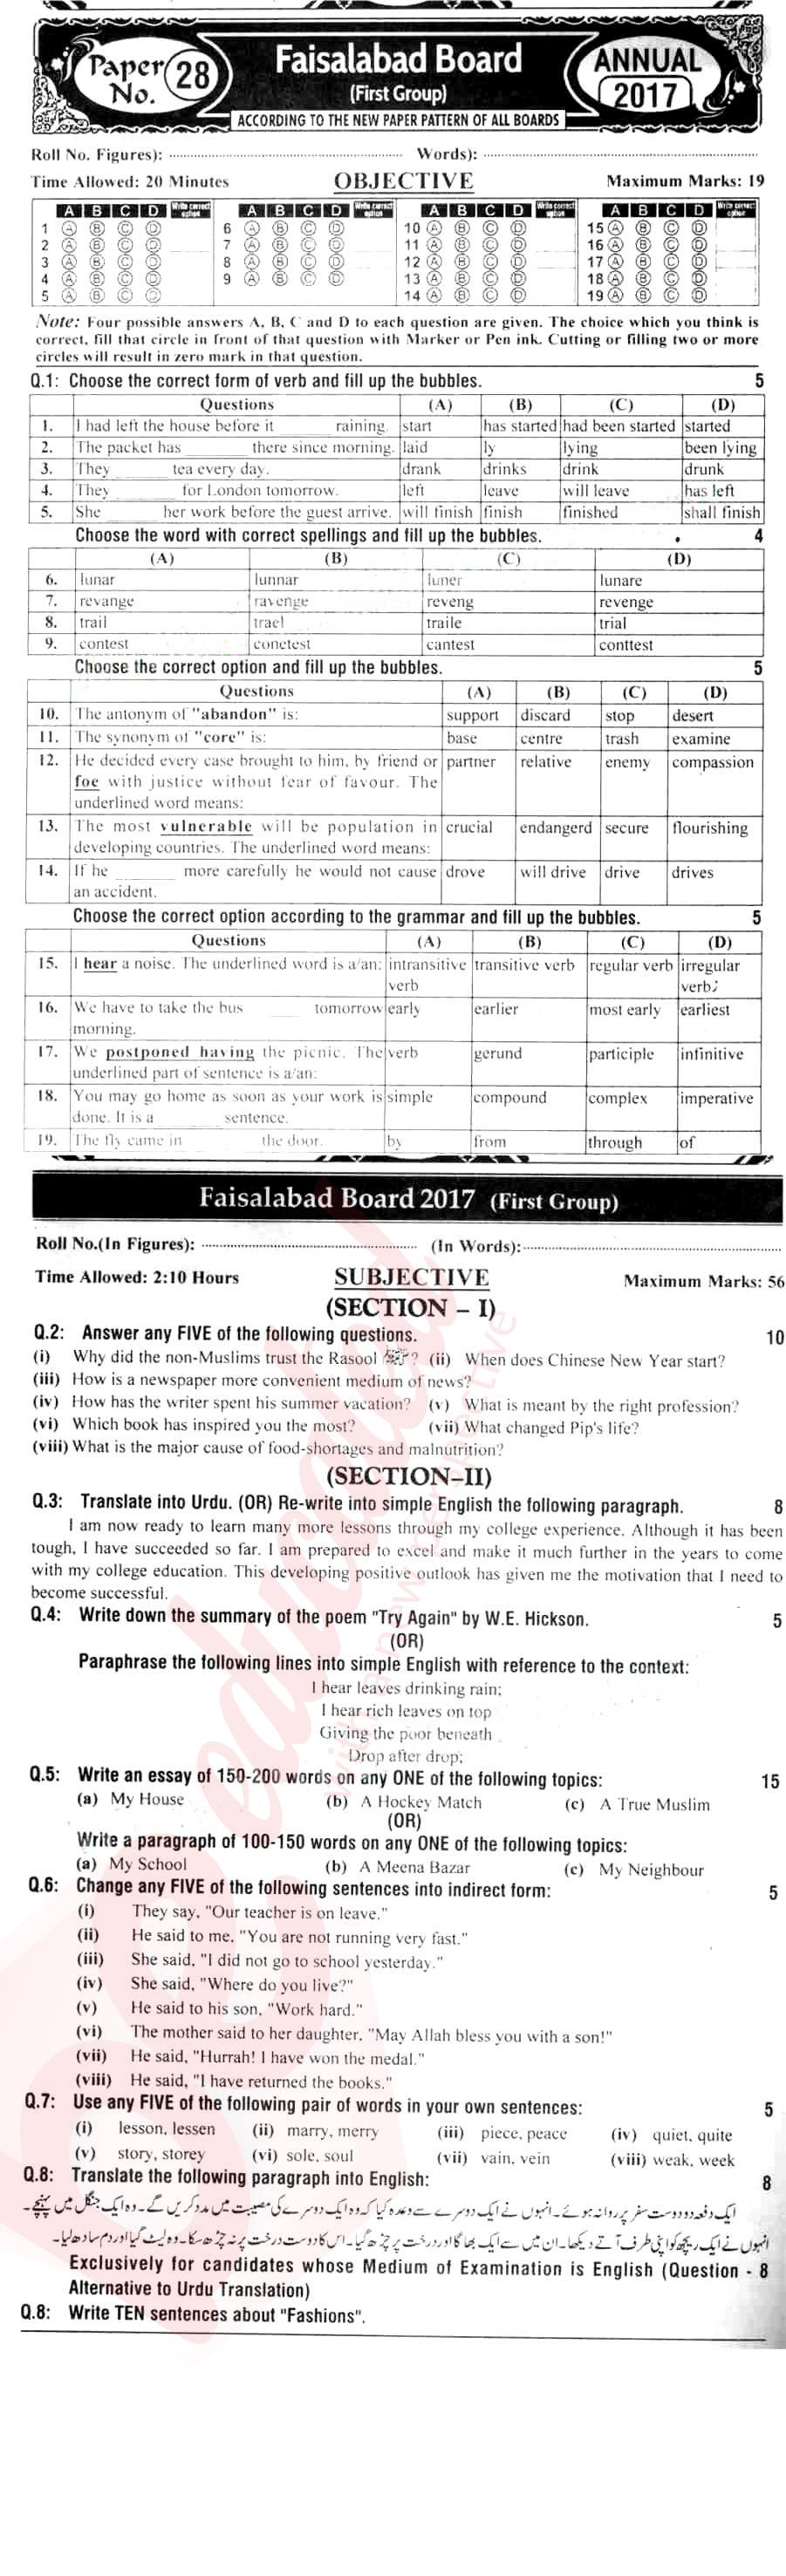 English 10th class Past Paper Group 1 BISE Faisalabad 2017